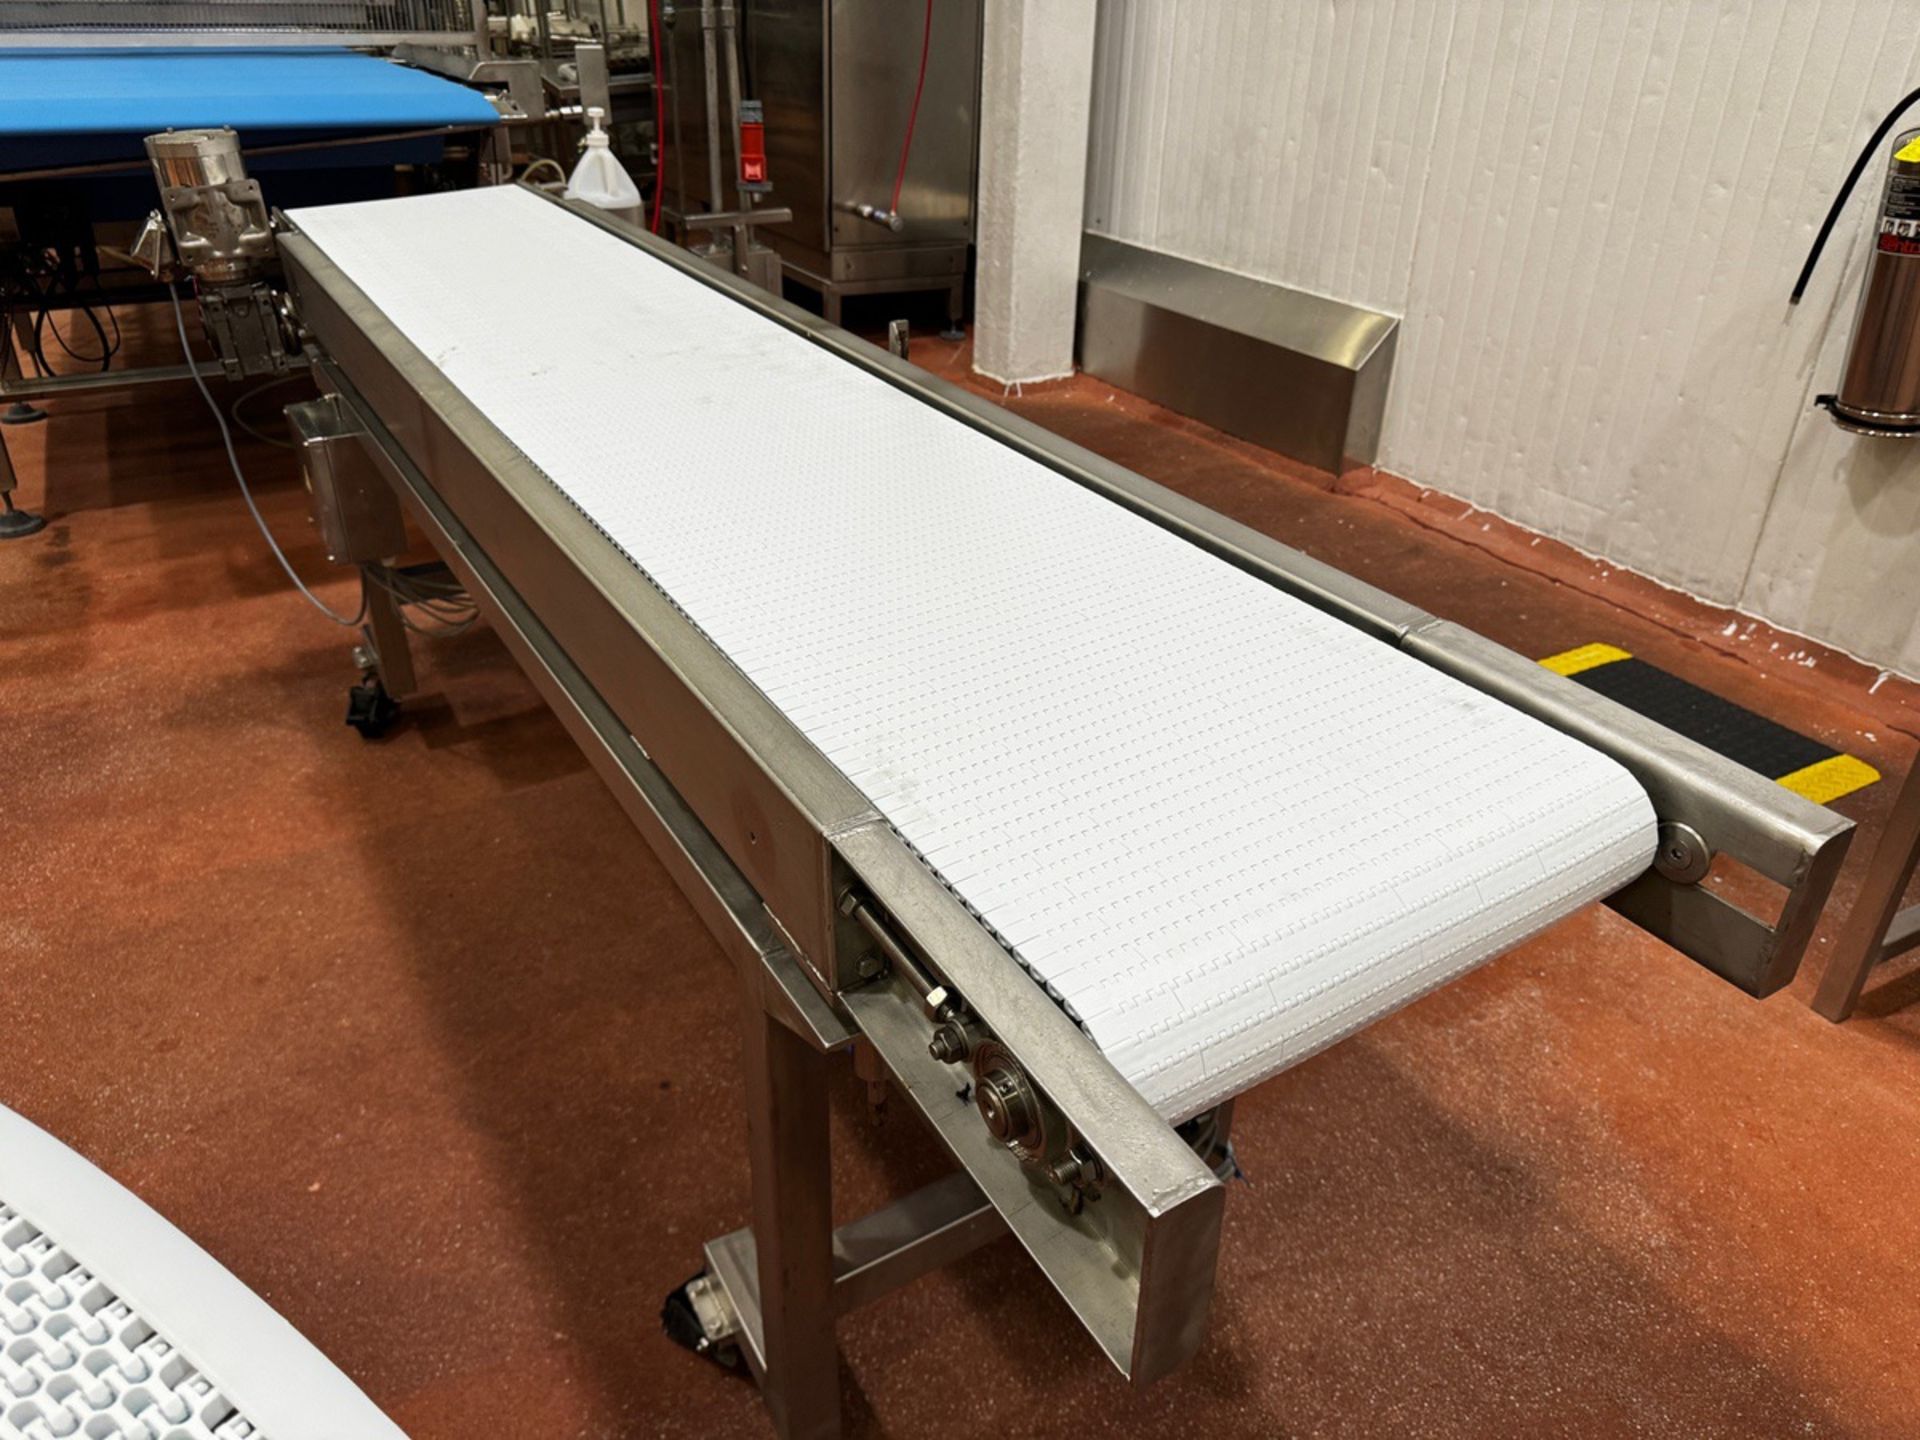 Stainless Steel Frame Conveyor Mounted on Casters, 16" W x 94" OA Length - Image 2 of 5